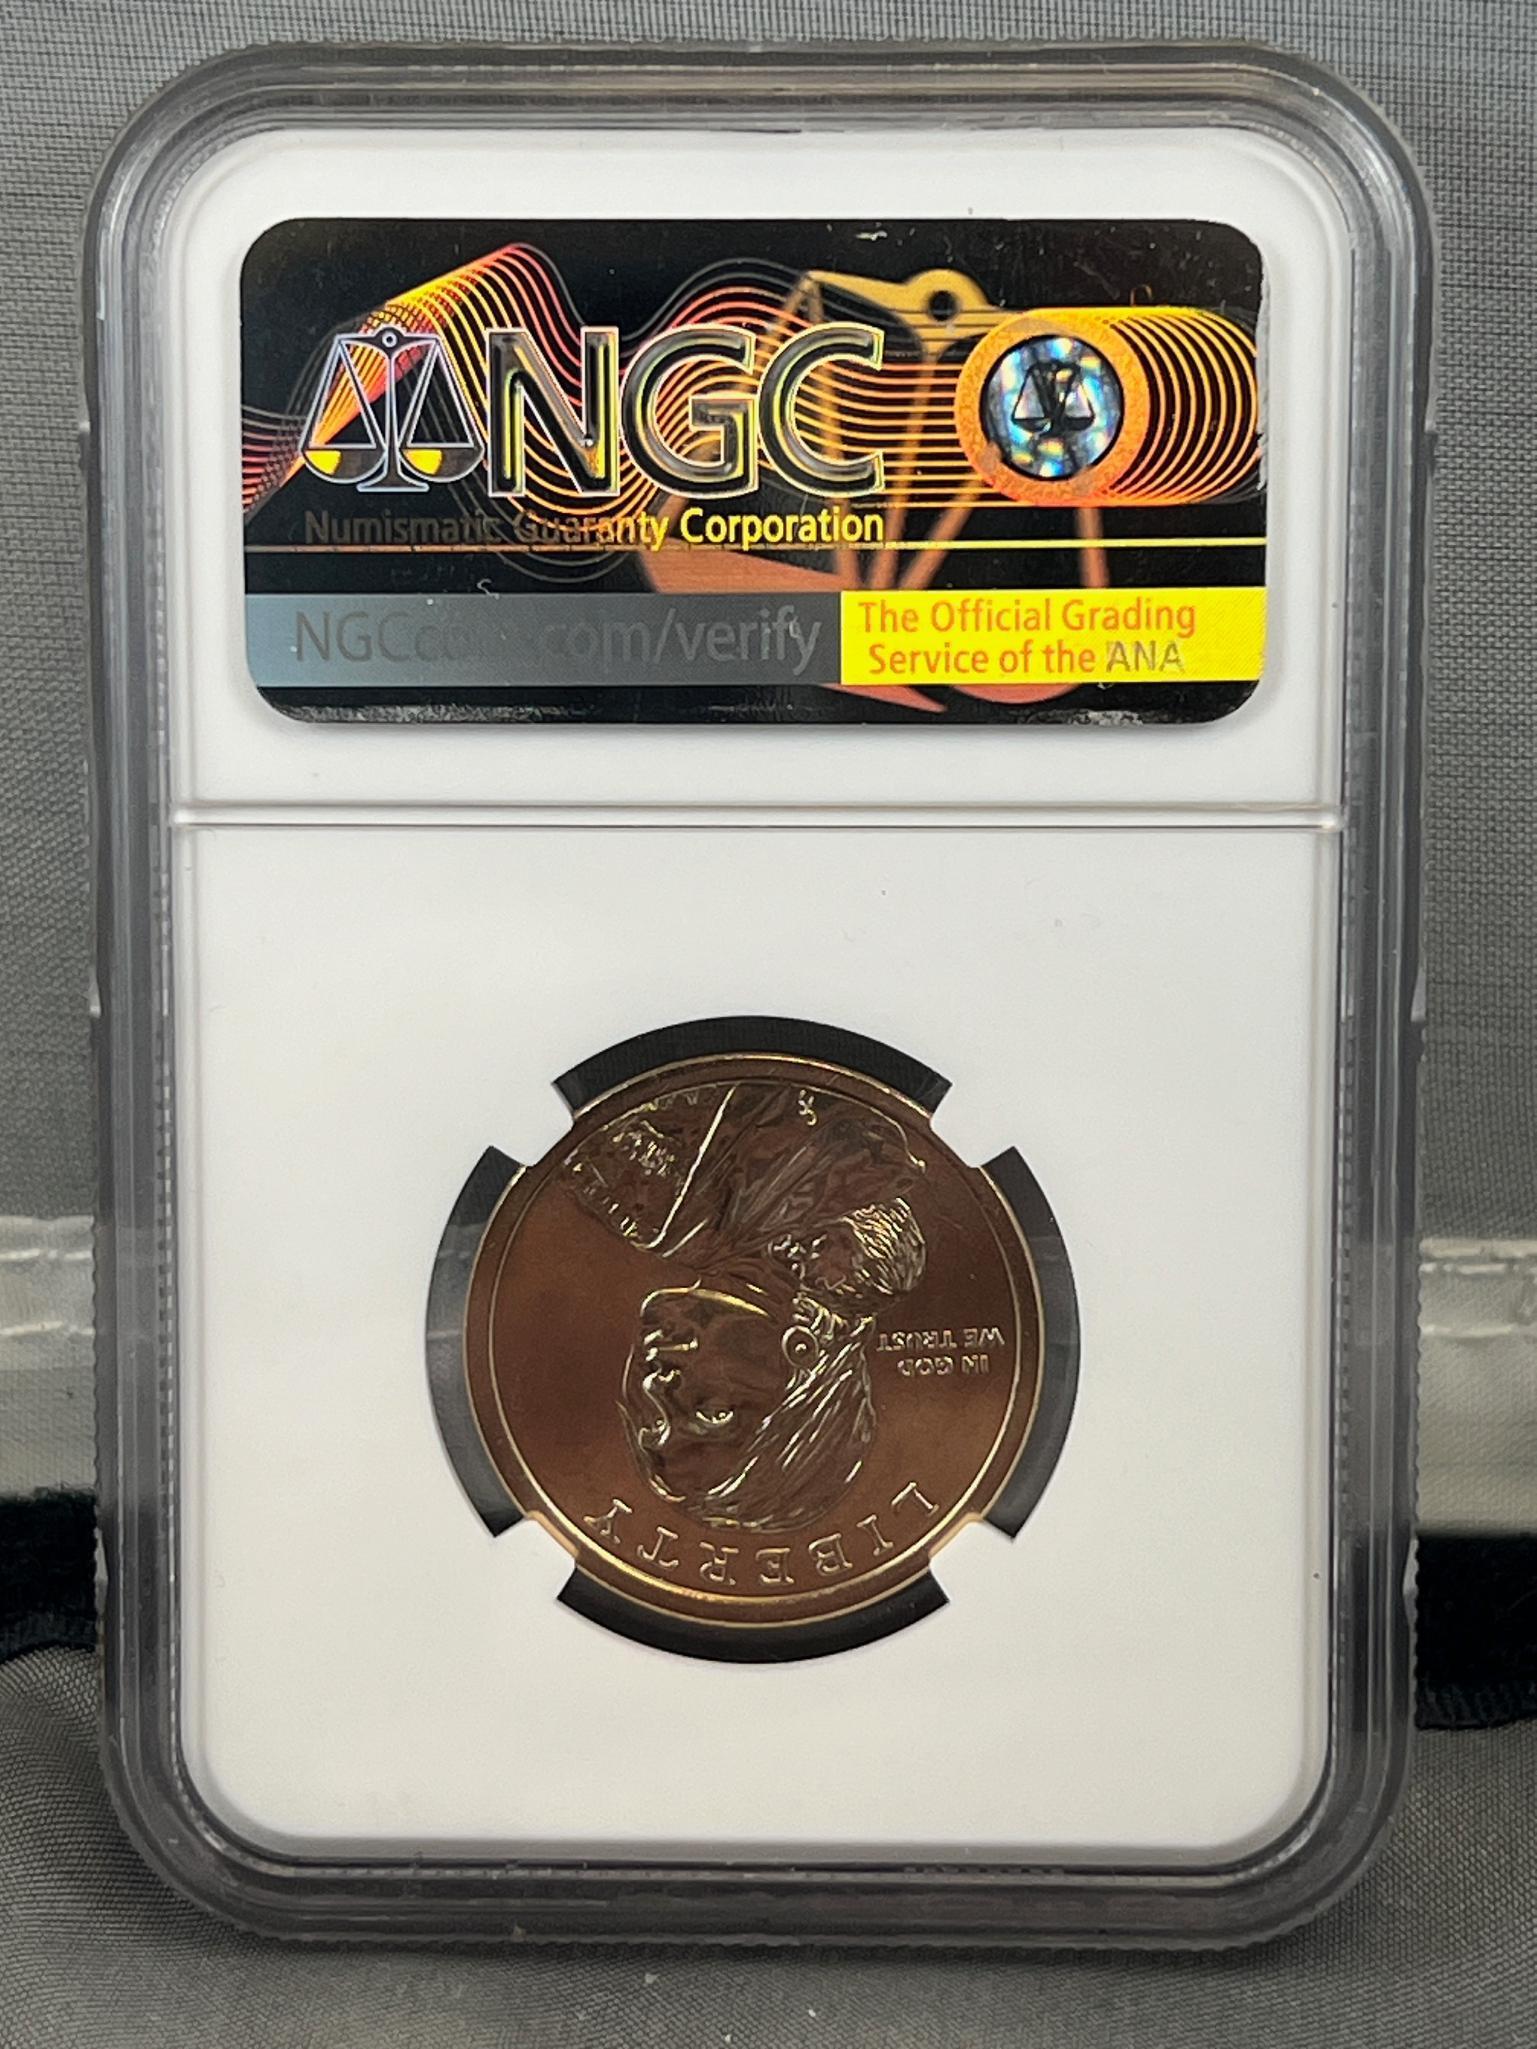 2019-P Sacagawea $1 Mary Golda Ross in NGC MS67 Holder